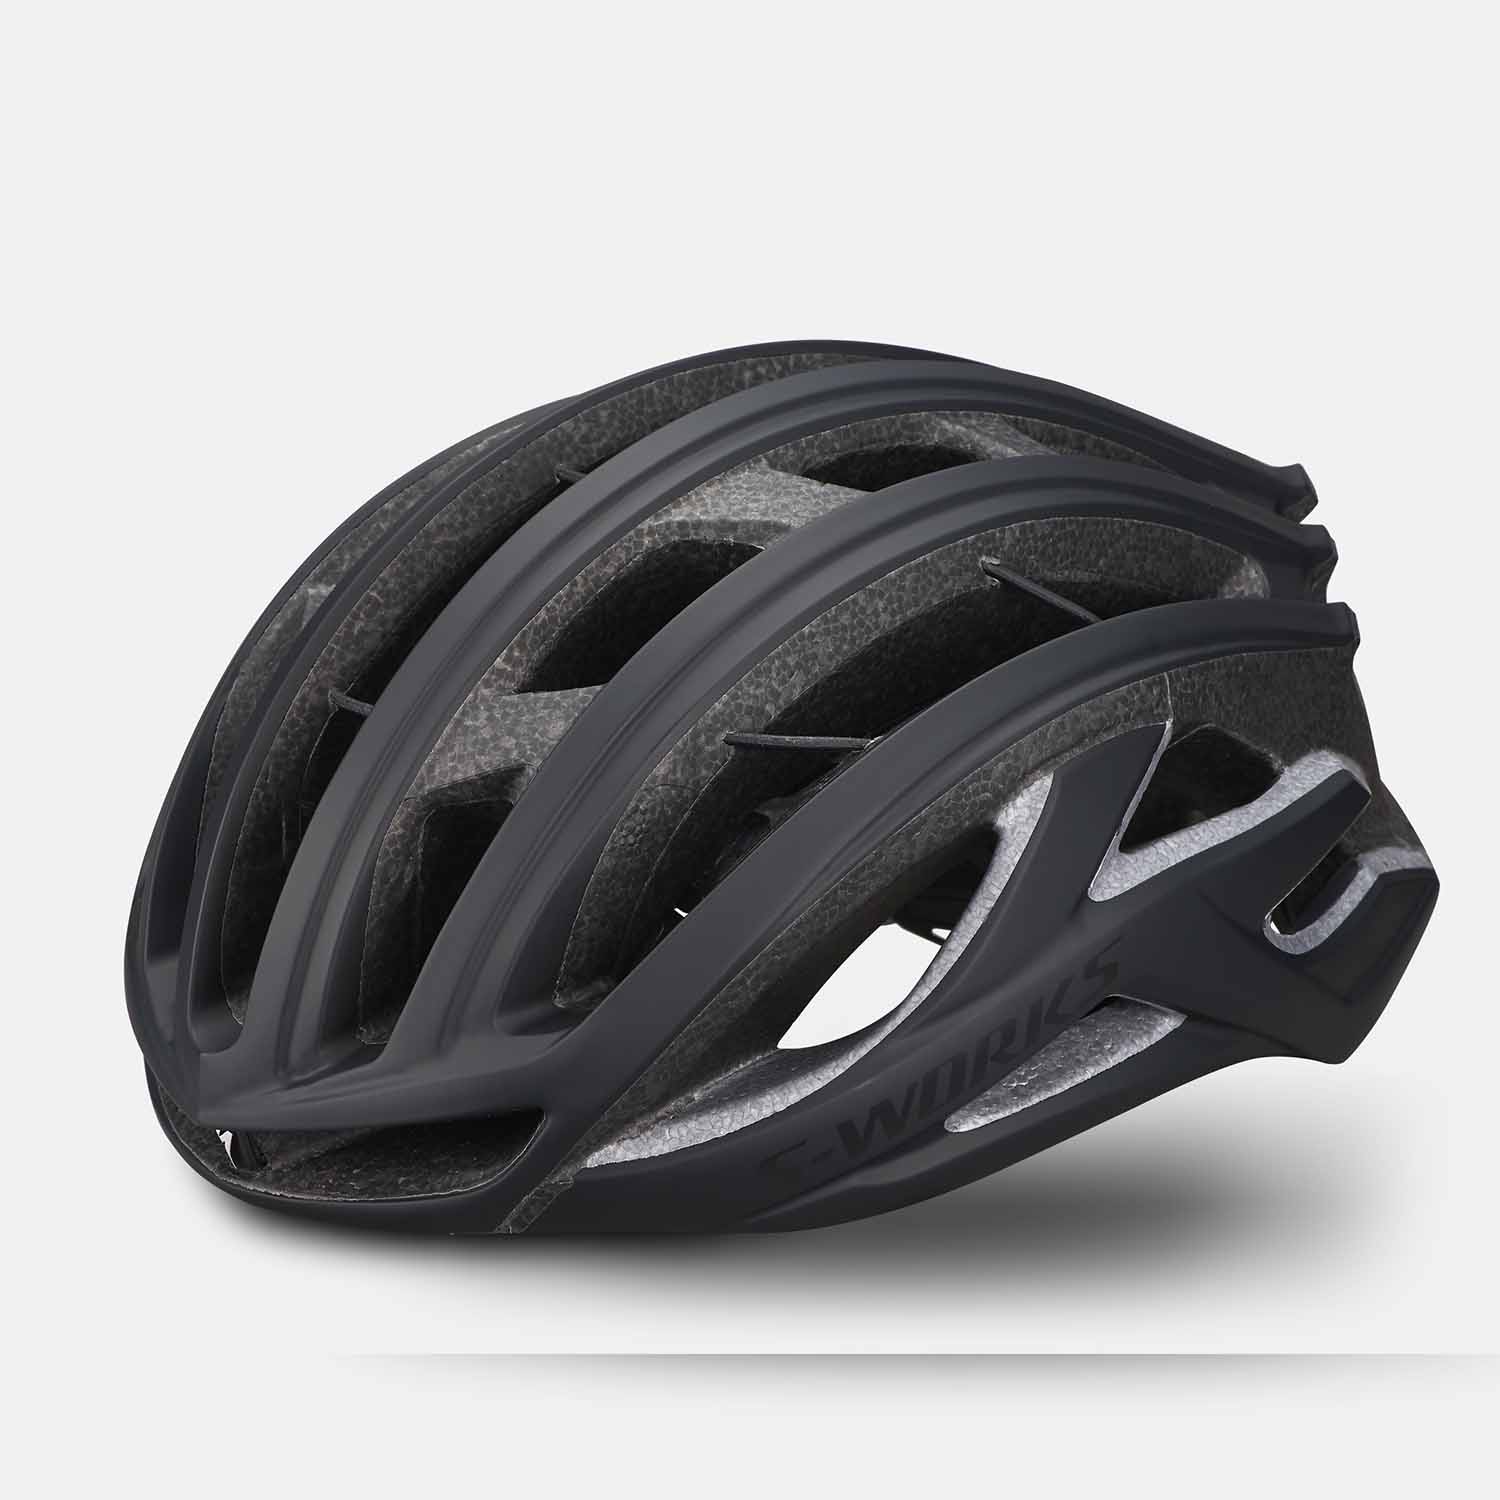 CASQUE S-WORKS PREVAIL II VENT